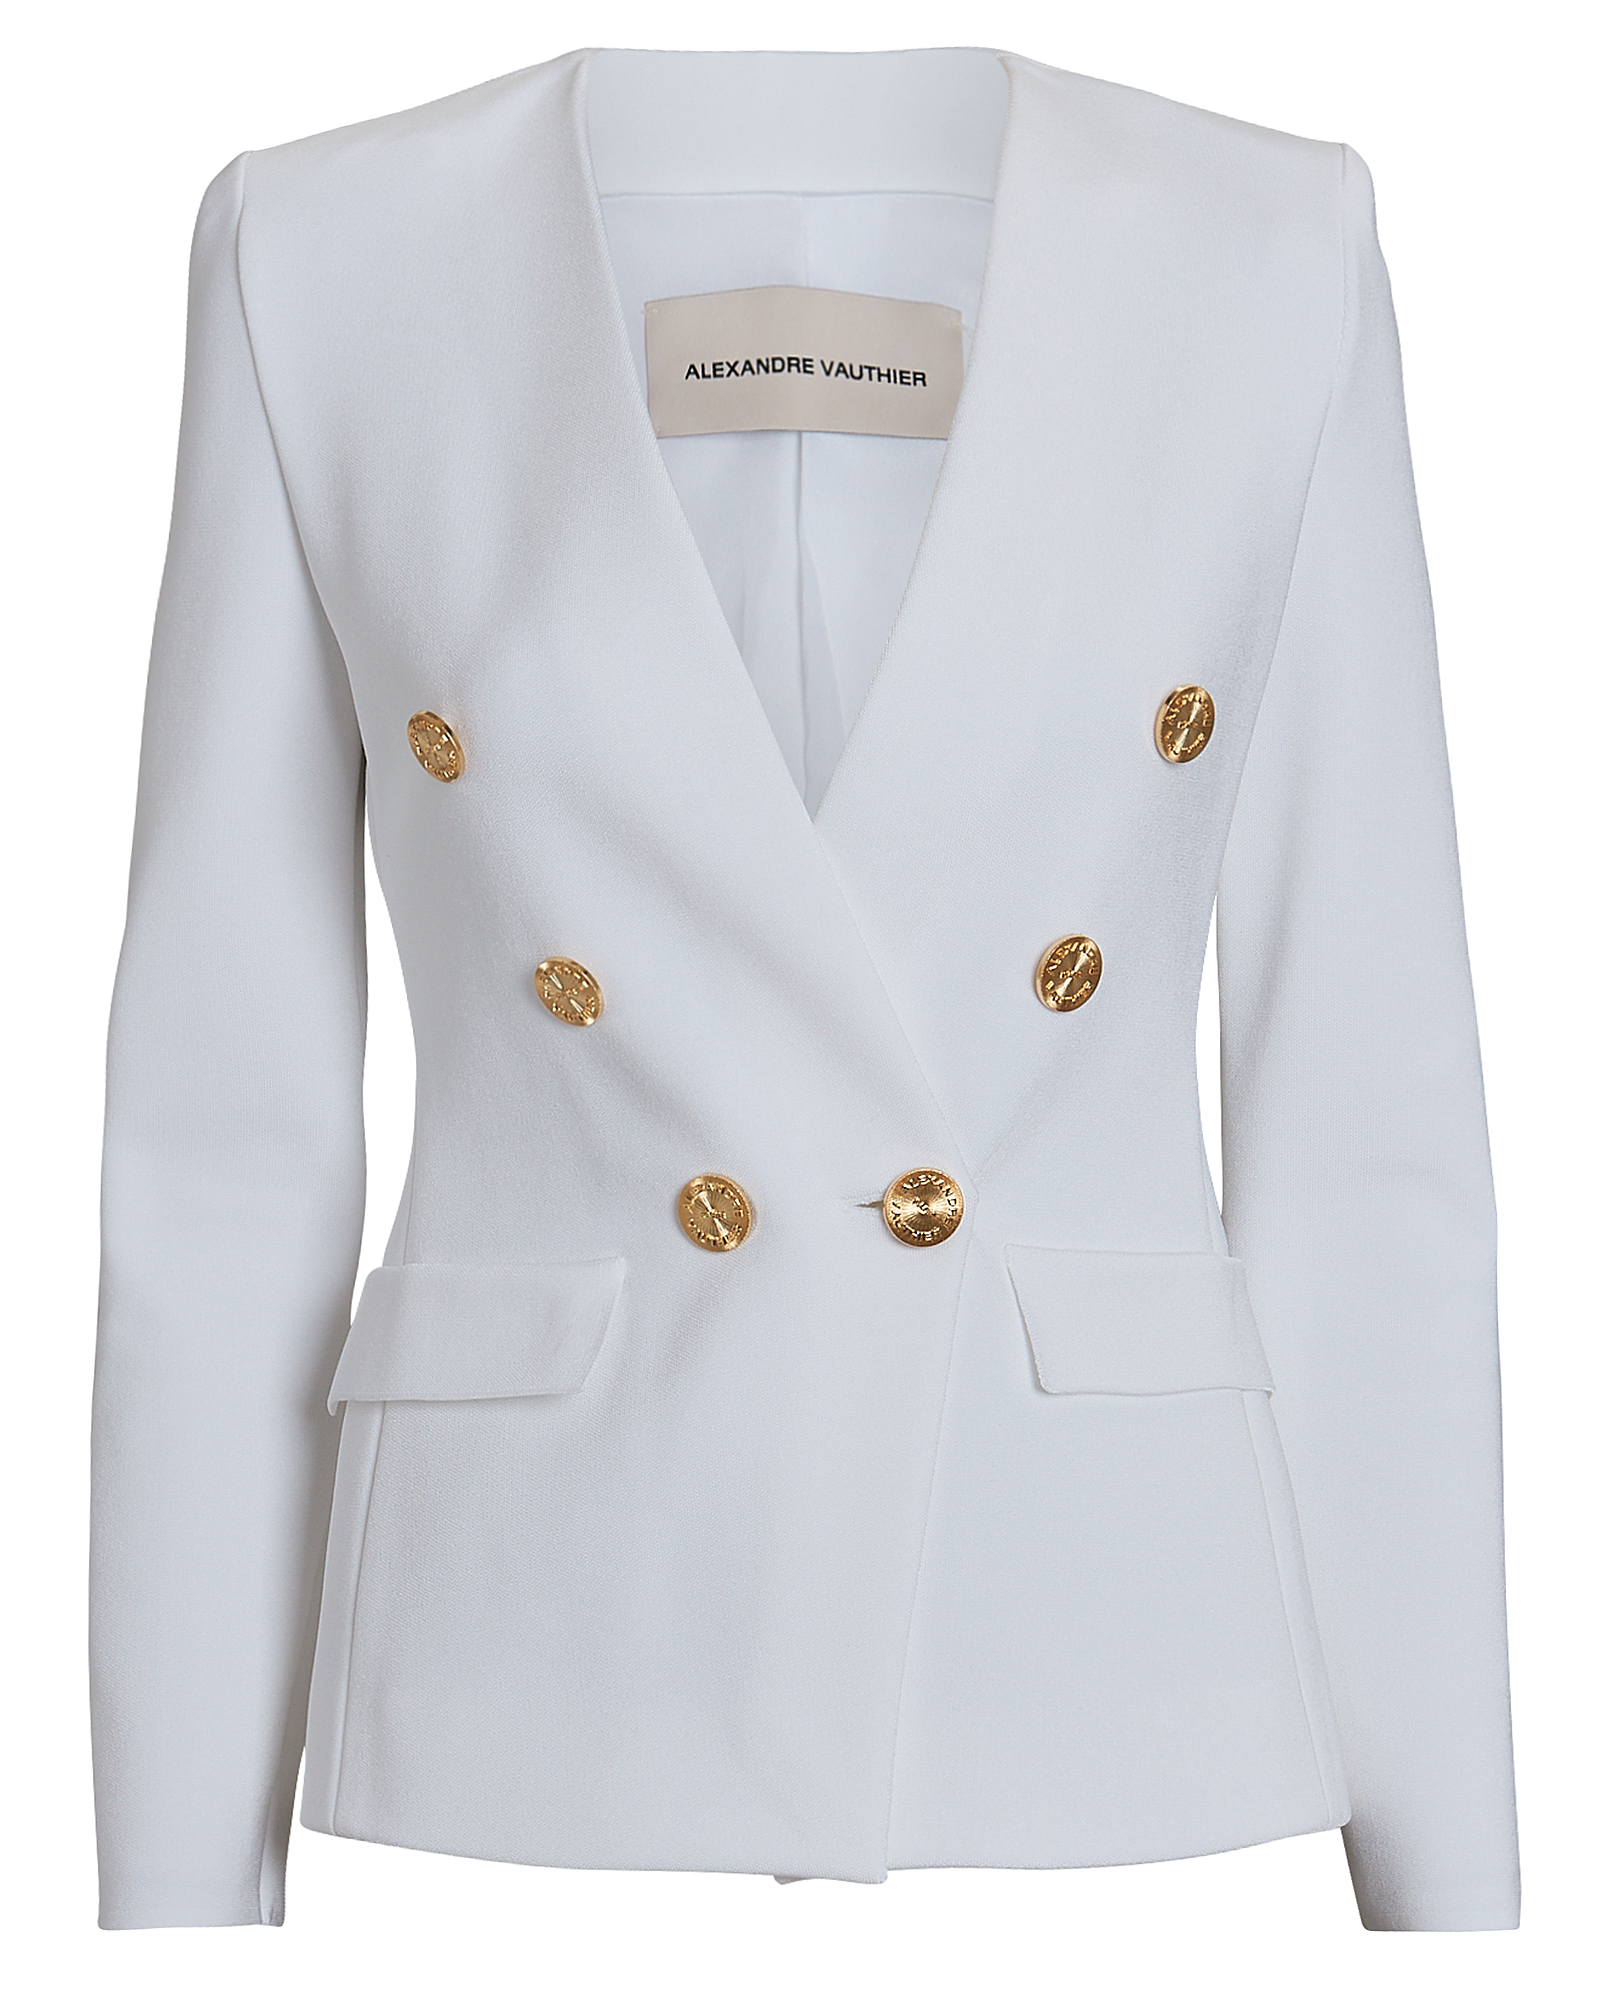 Alexandre Vauthier Double-Breasted Knit Blazer | INTERMIX®